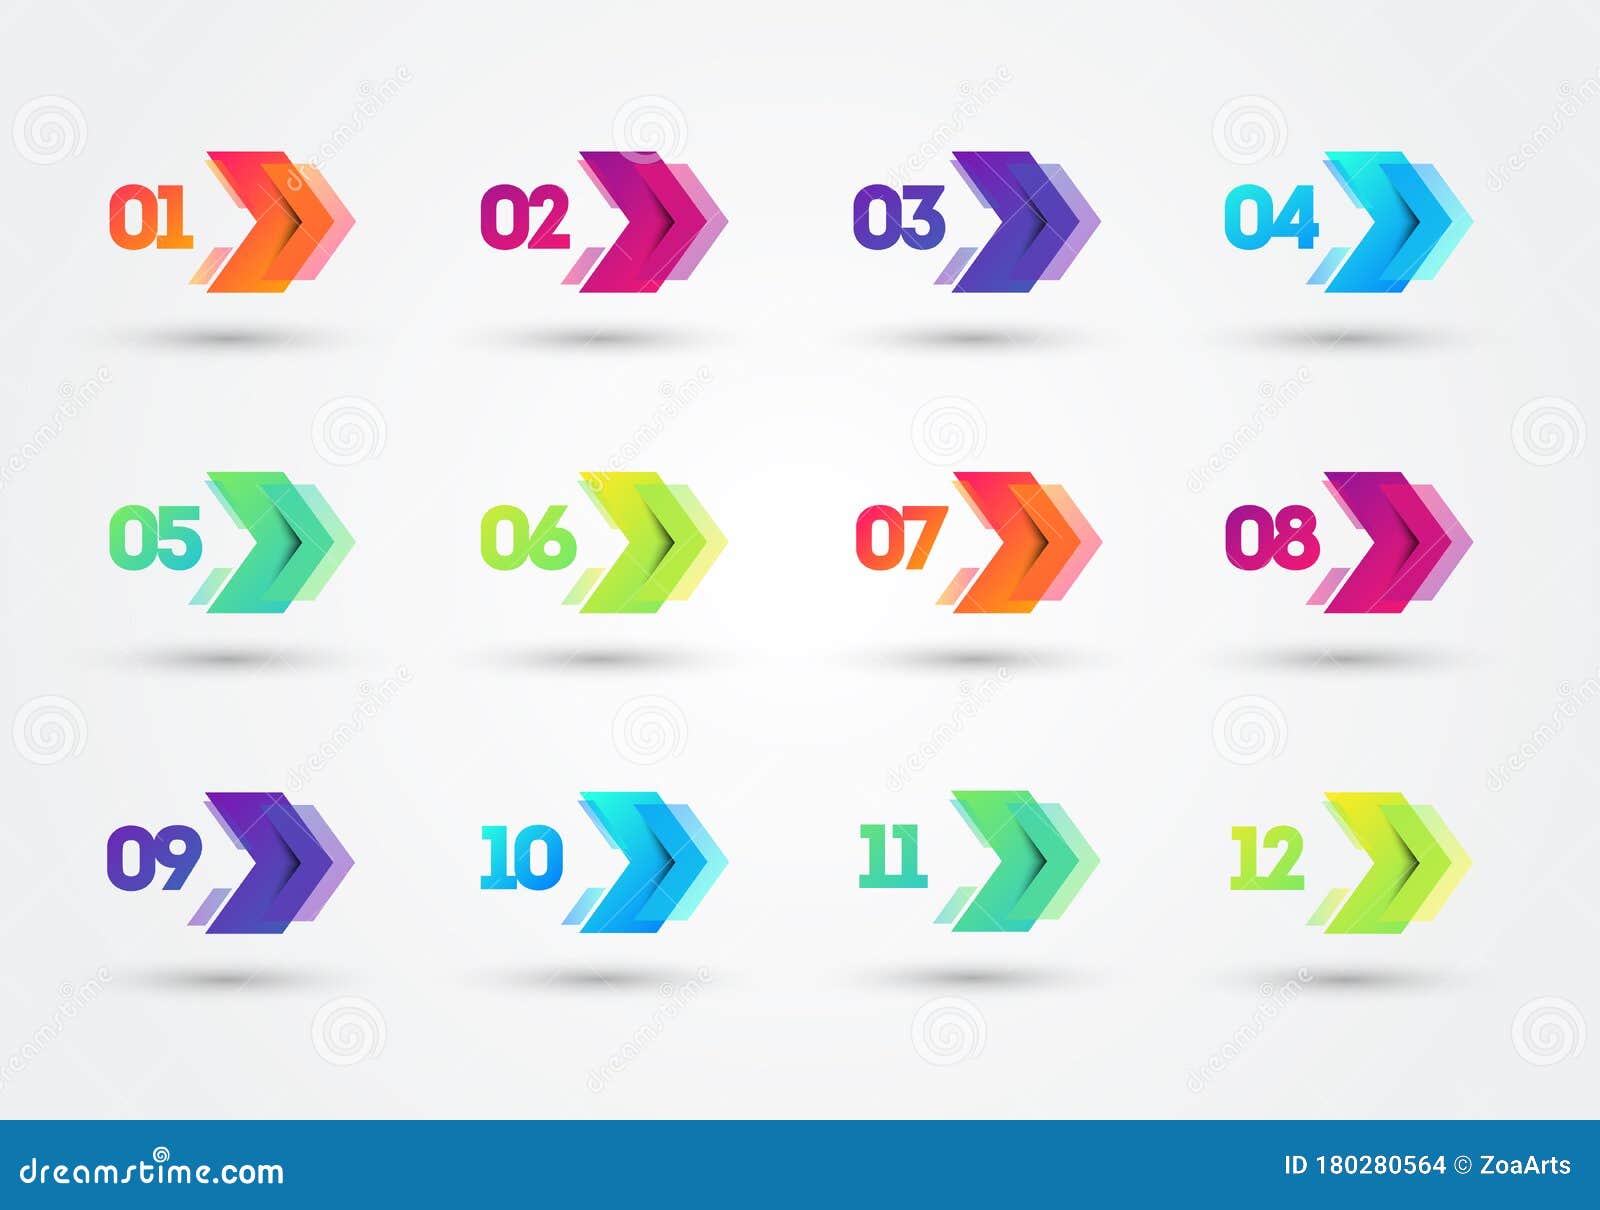   modern colorful bullet points with number 1 to 12. arrows in cyber look